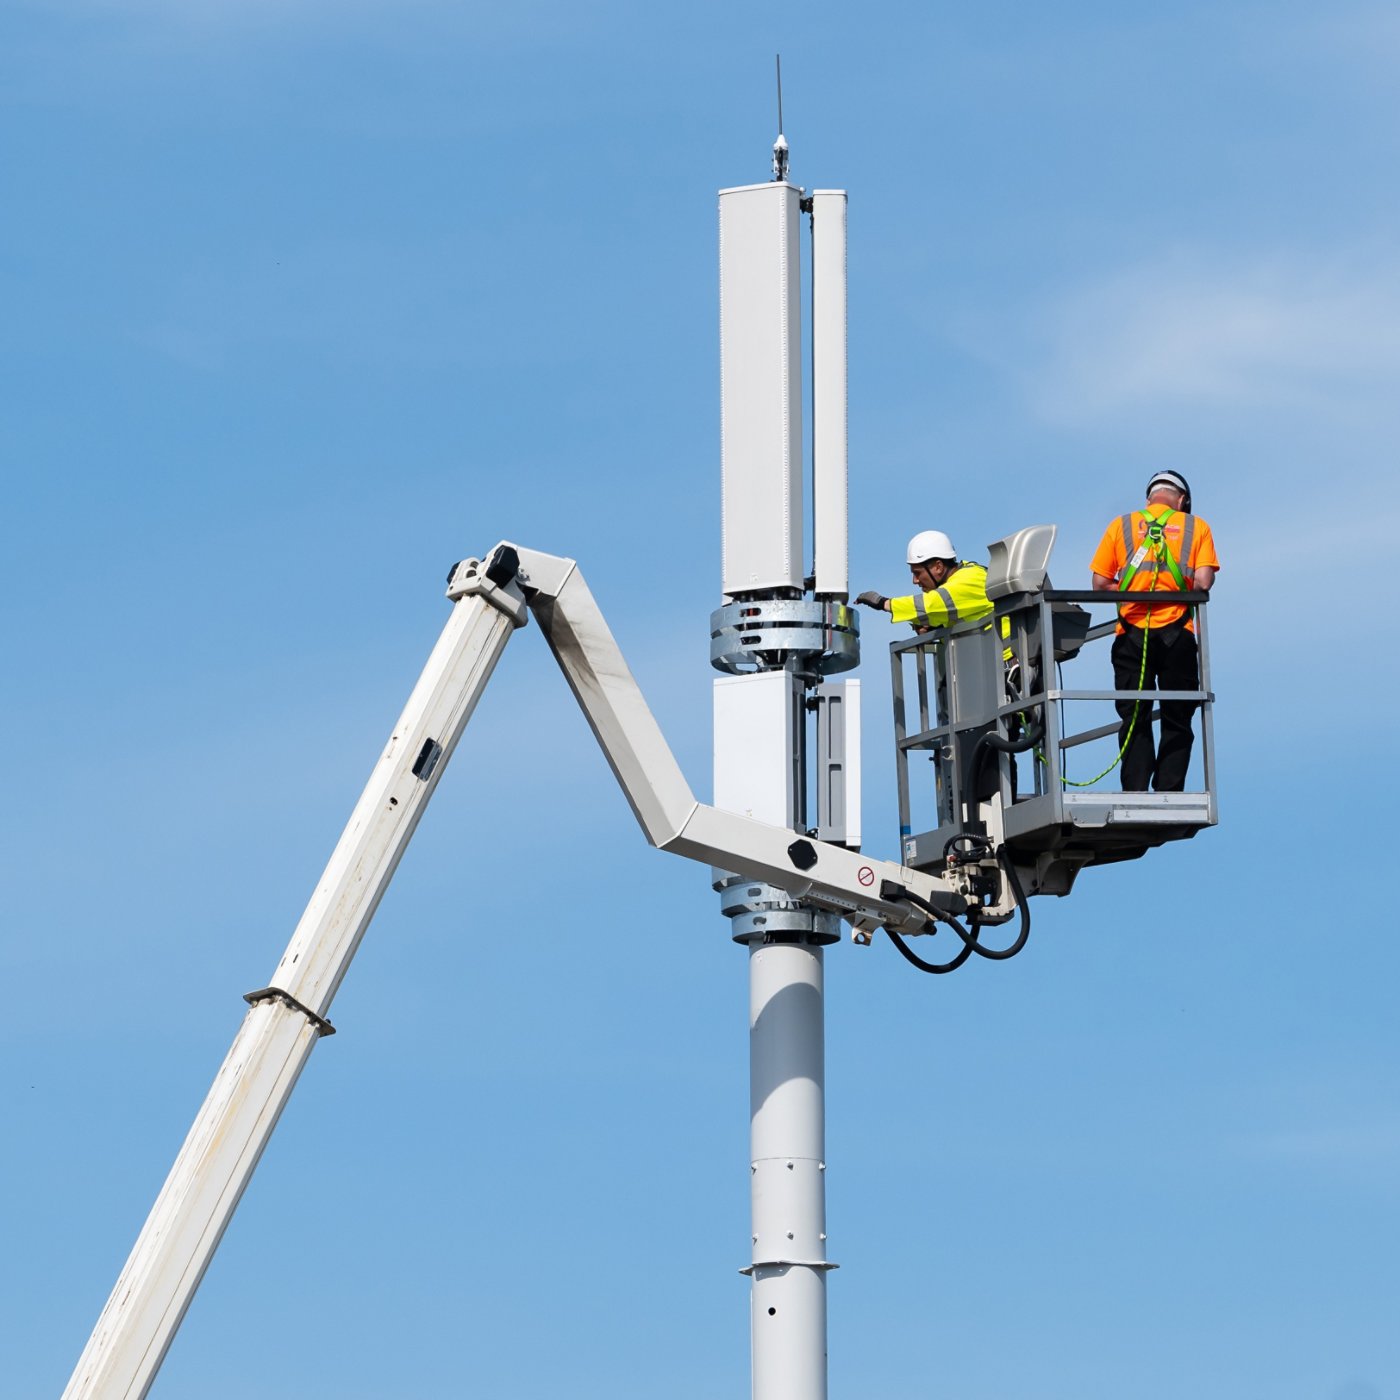 BRISTOL, ENGLAND - JUNE 8: Workers install a 5G mobile phone mast using a cherry picker on June 8, 2021 in Bristol, England. (Photo by Matthew Horwood/Getty Images)